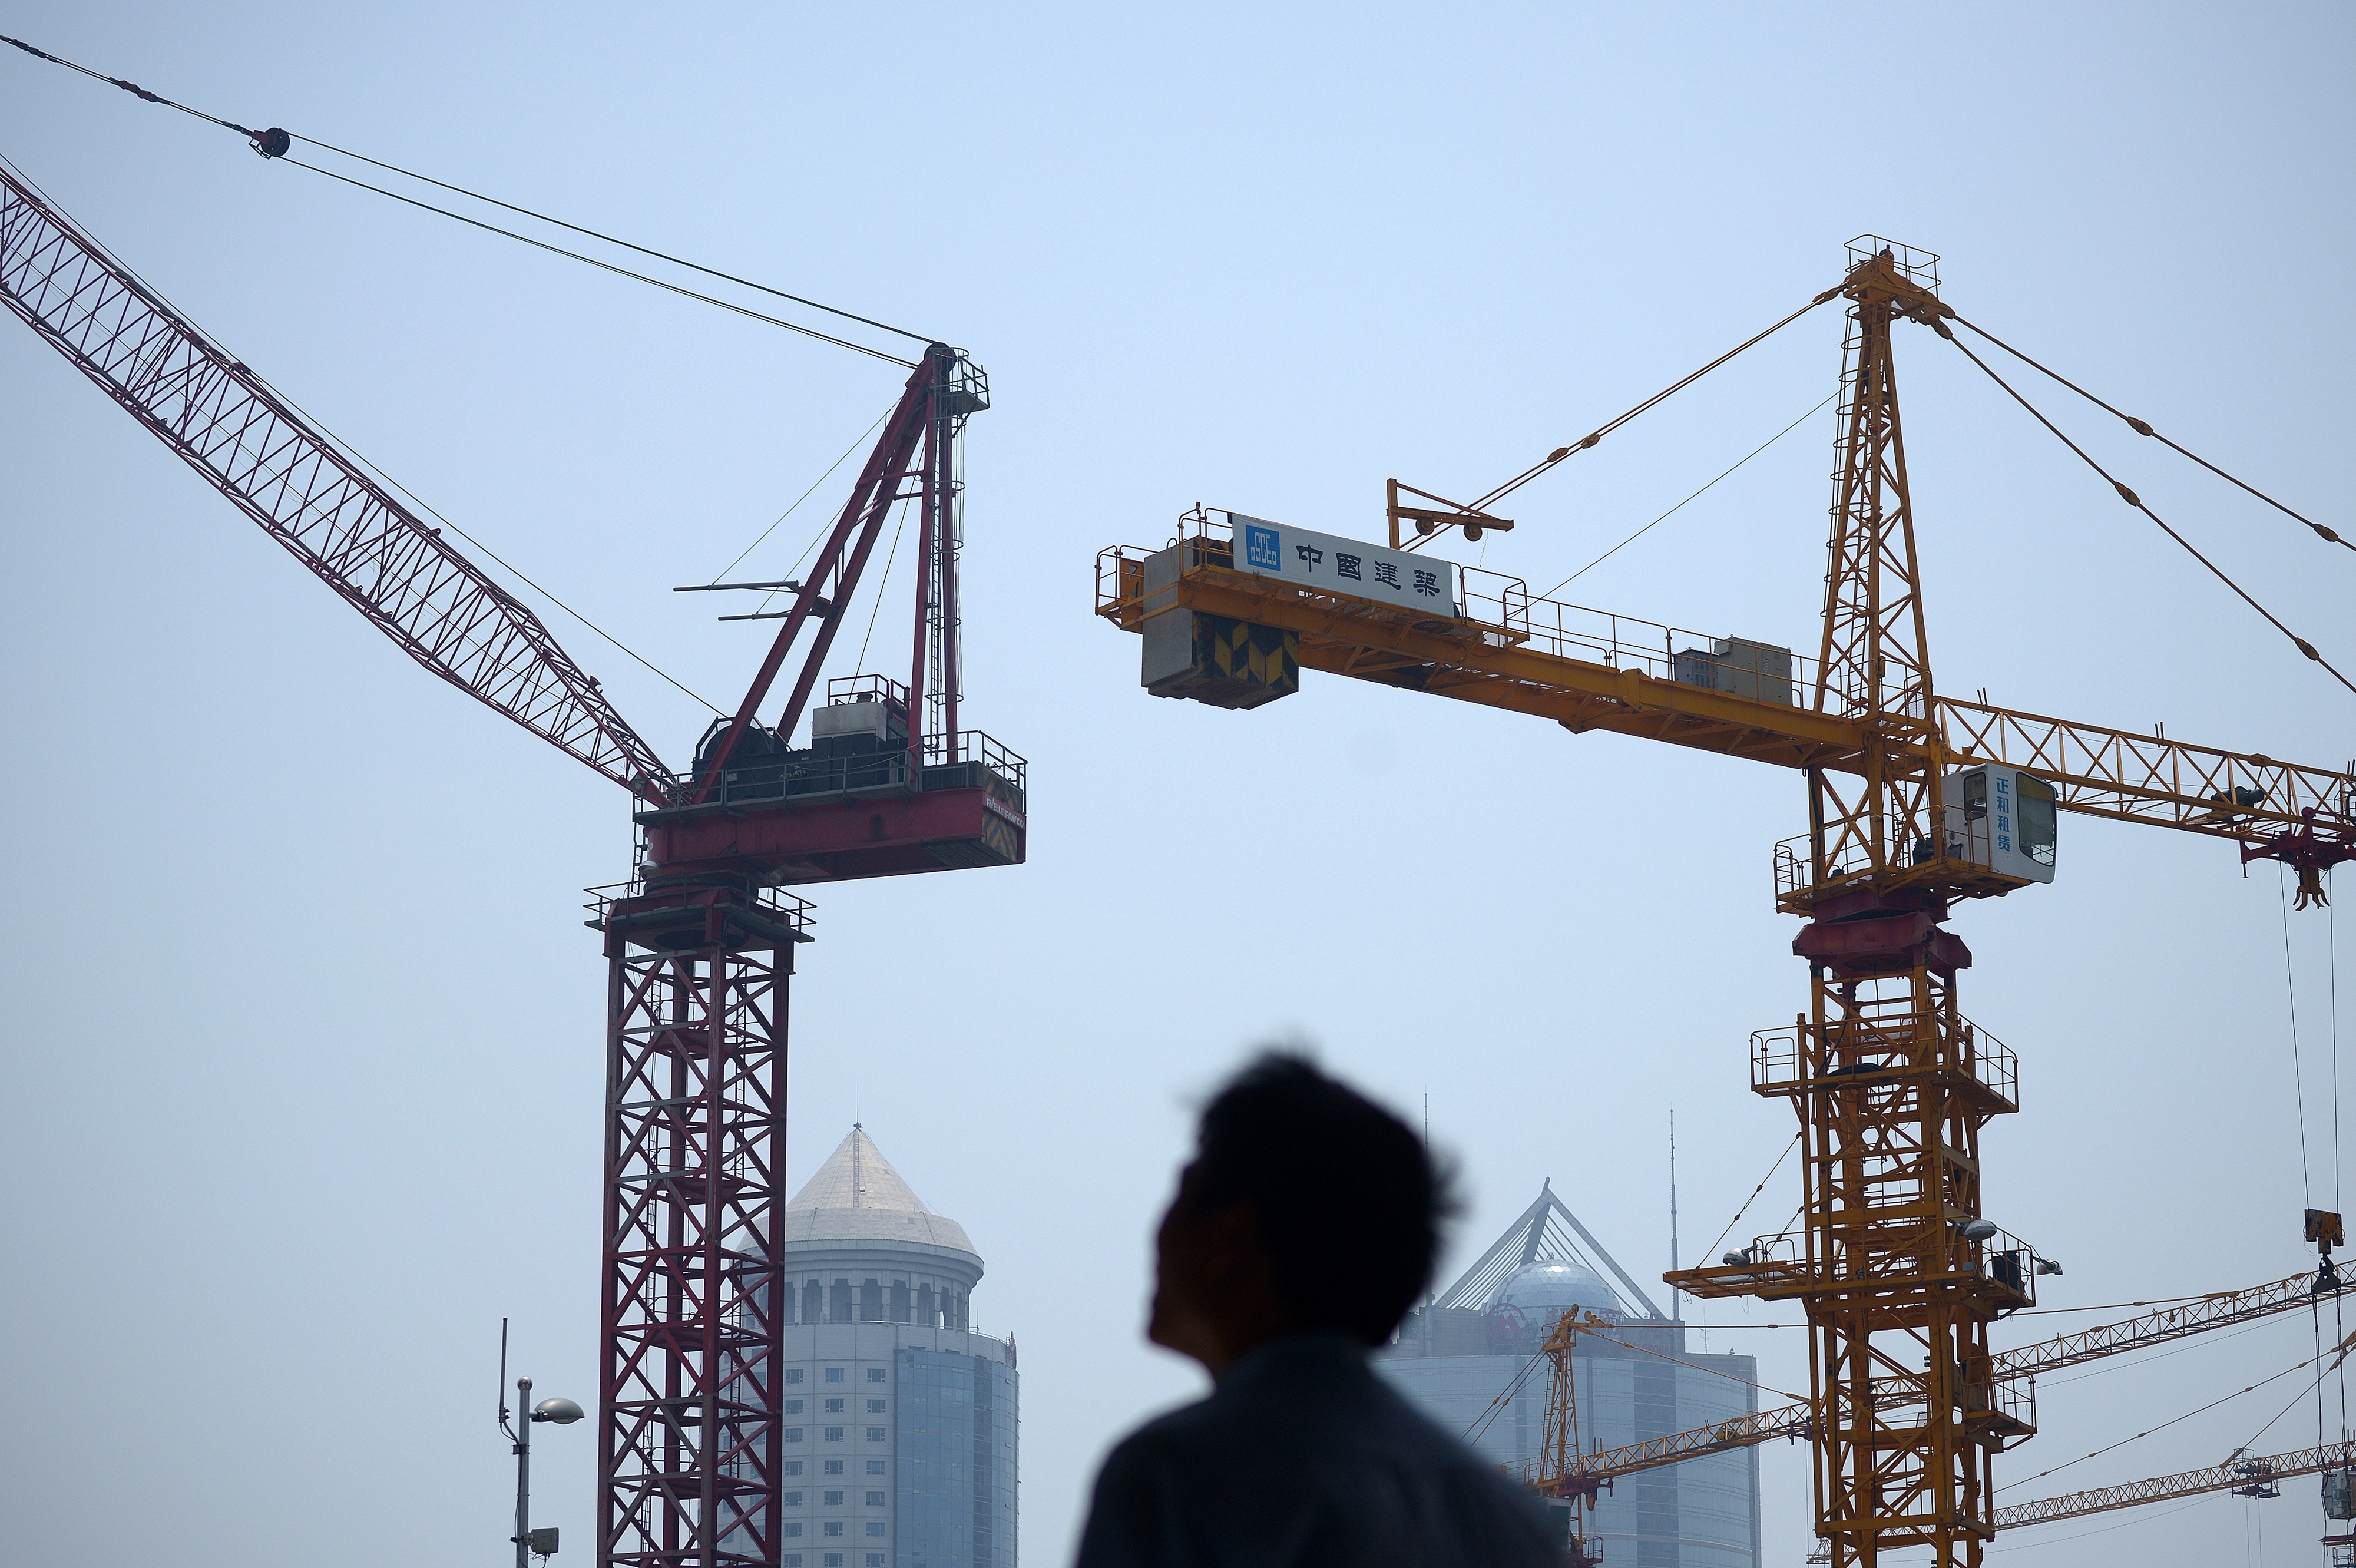 A man walks past a construction site in Beijing on May 30, 2014. After years of boom that have seen prices rocket, the prospect of a bust is looming over China's vast property sector. (WANG ZHAO—AFP/Getty Images)